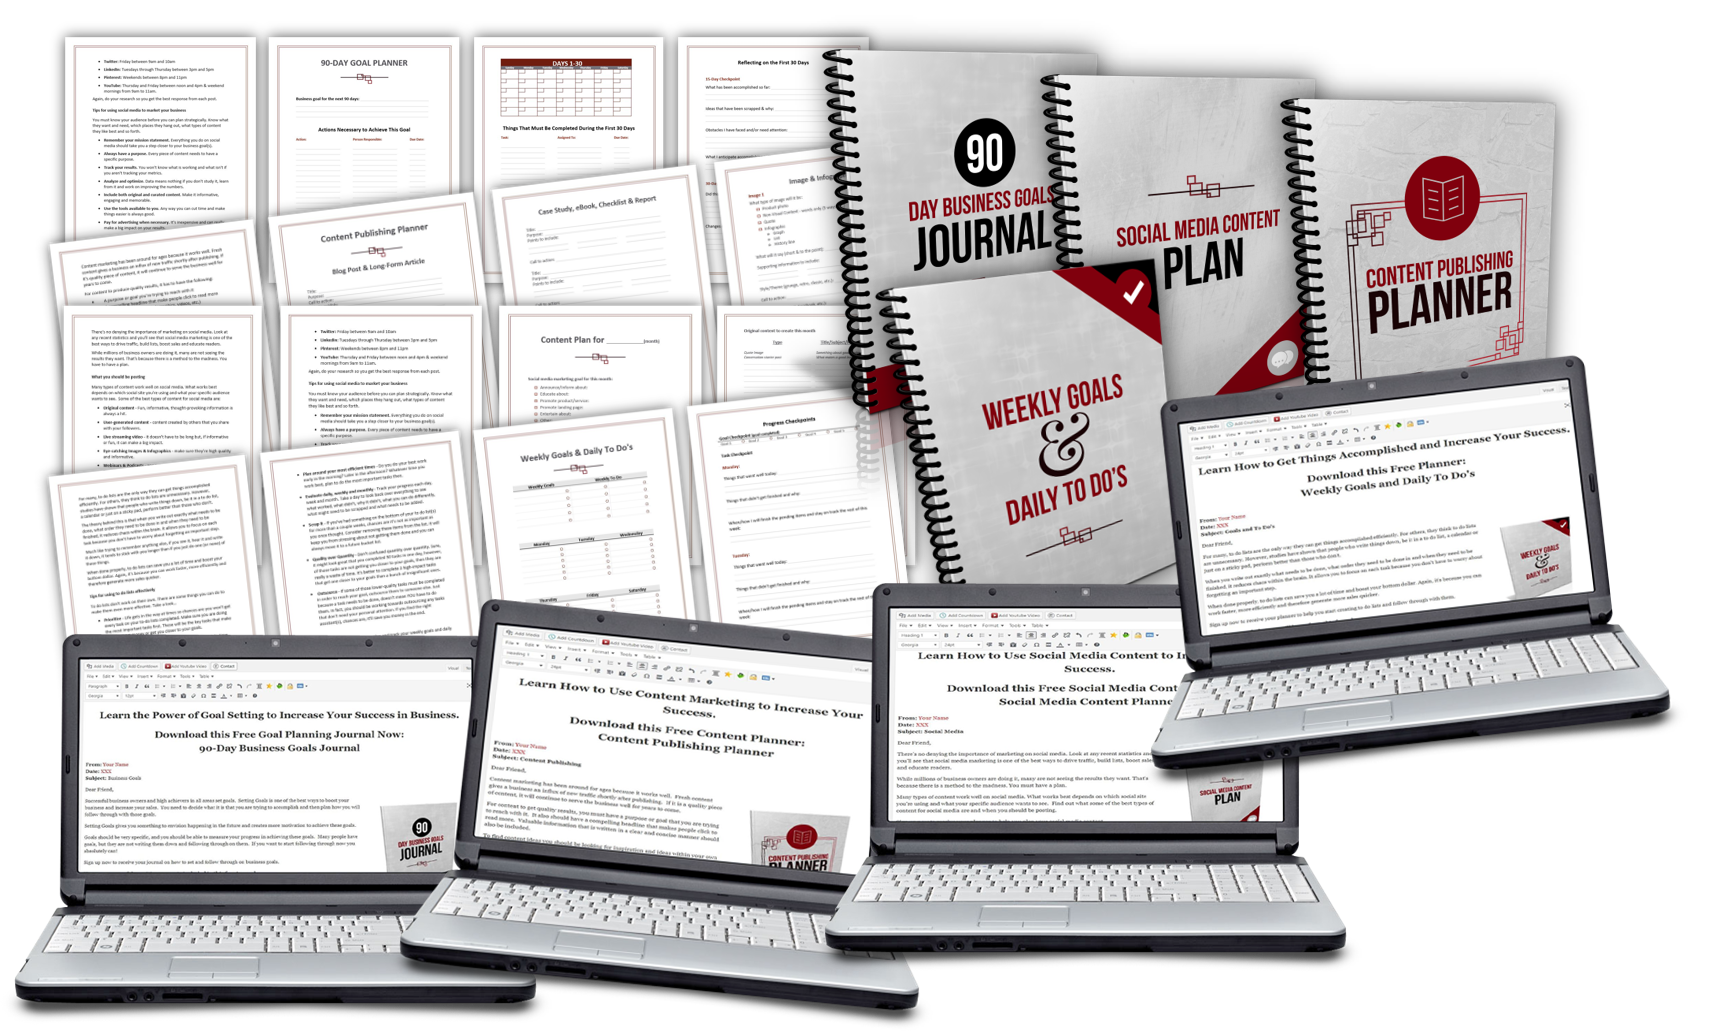 Free PLR - Business Journals and Planners